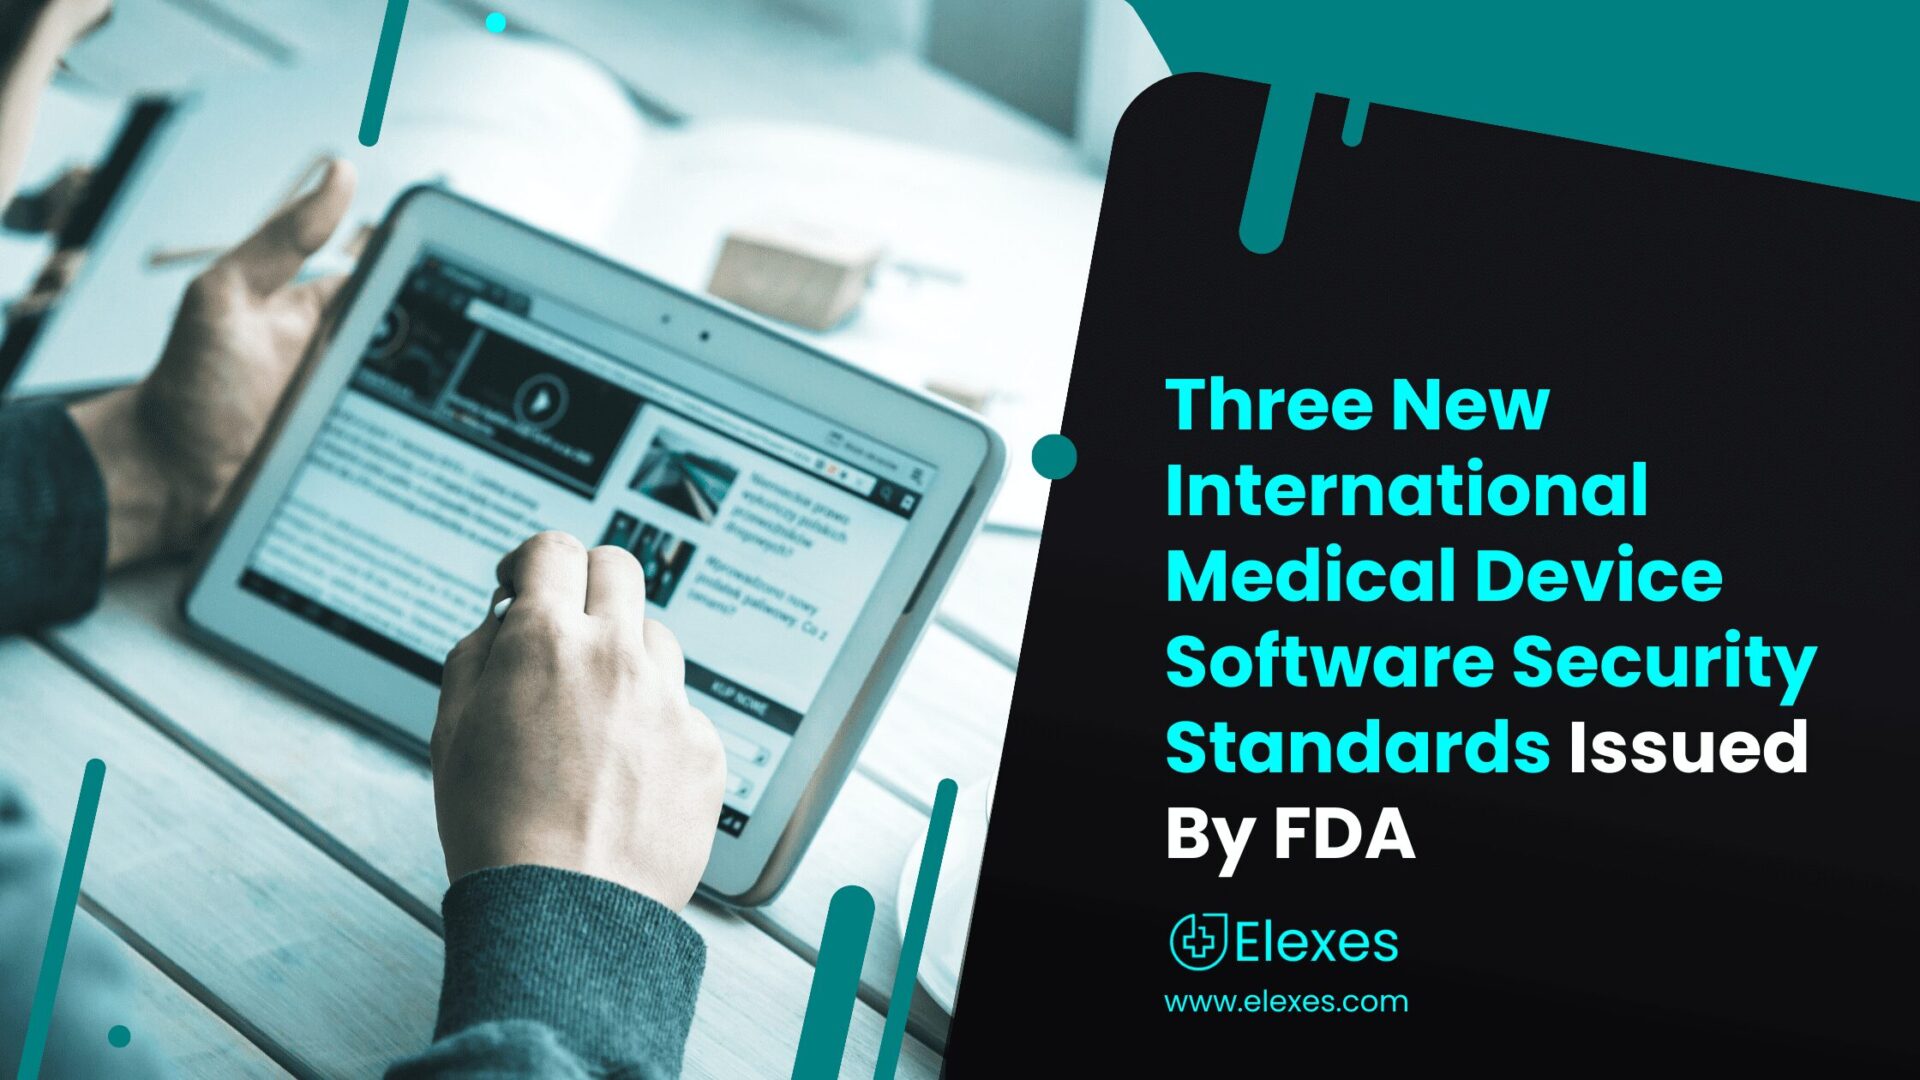 Three New International Medical Device Software Security Standards Issued By FDA